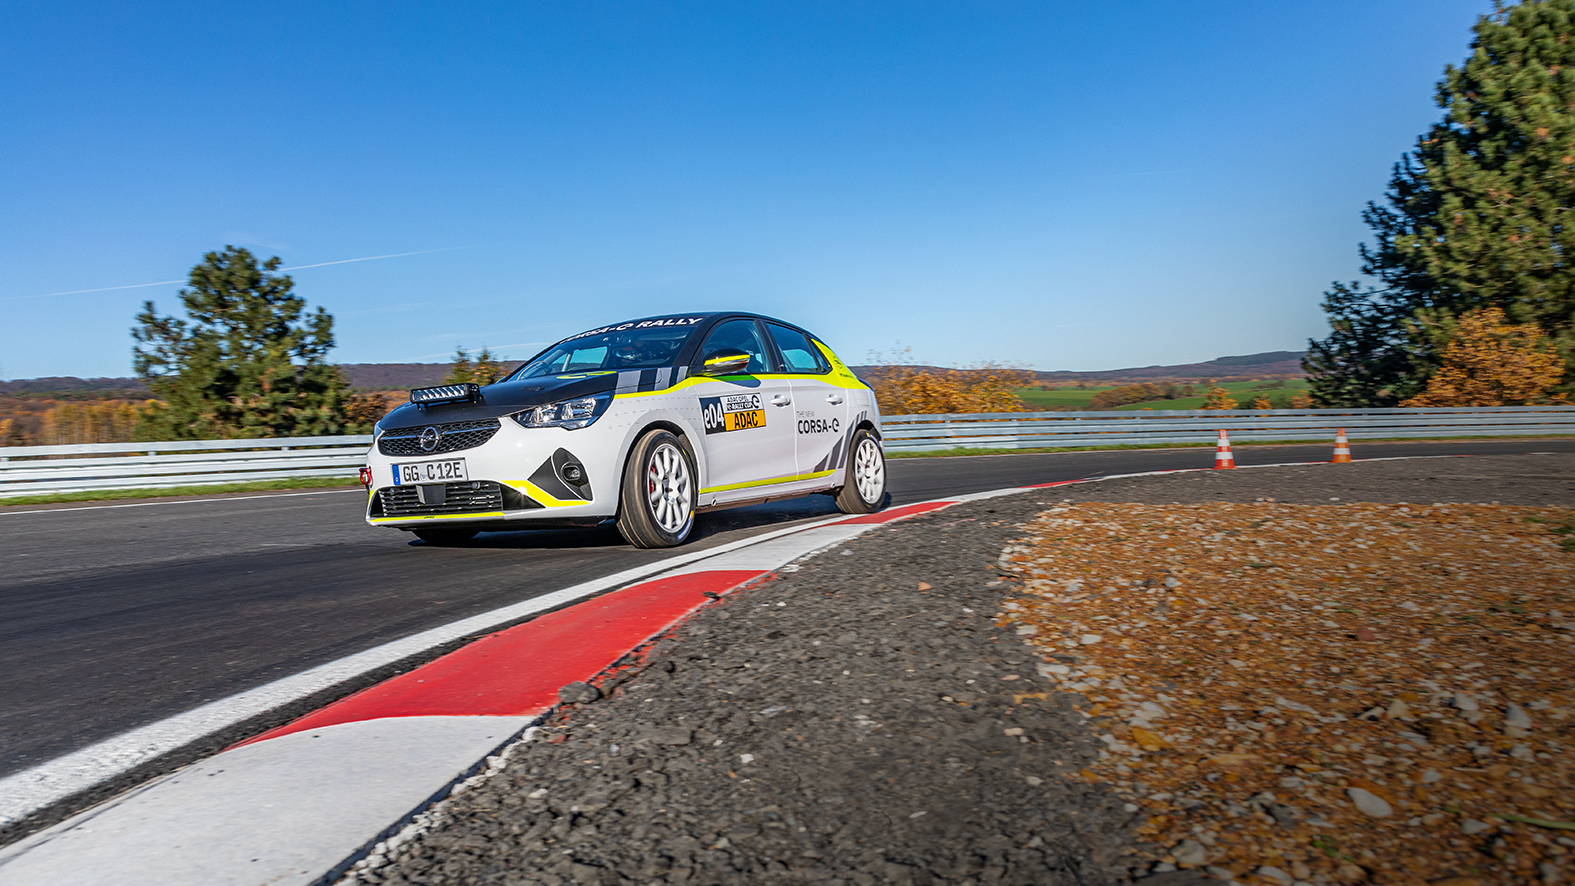 World's First Fully-Electric Rally Car Is the Corsa-E